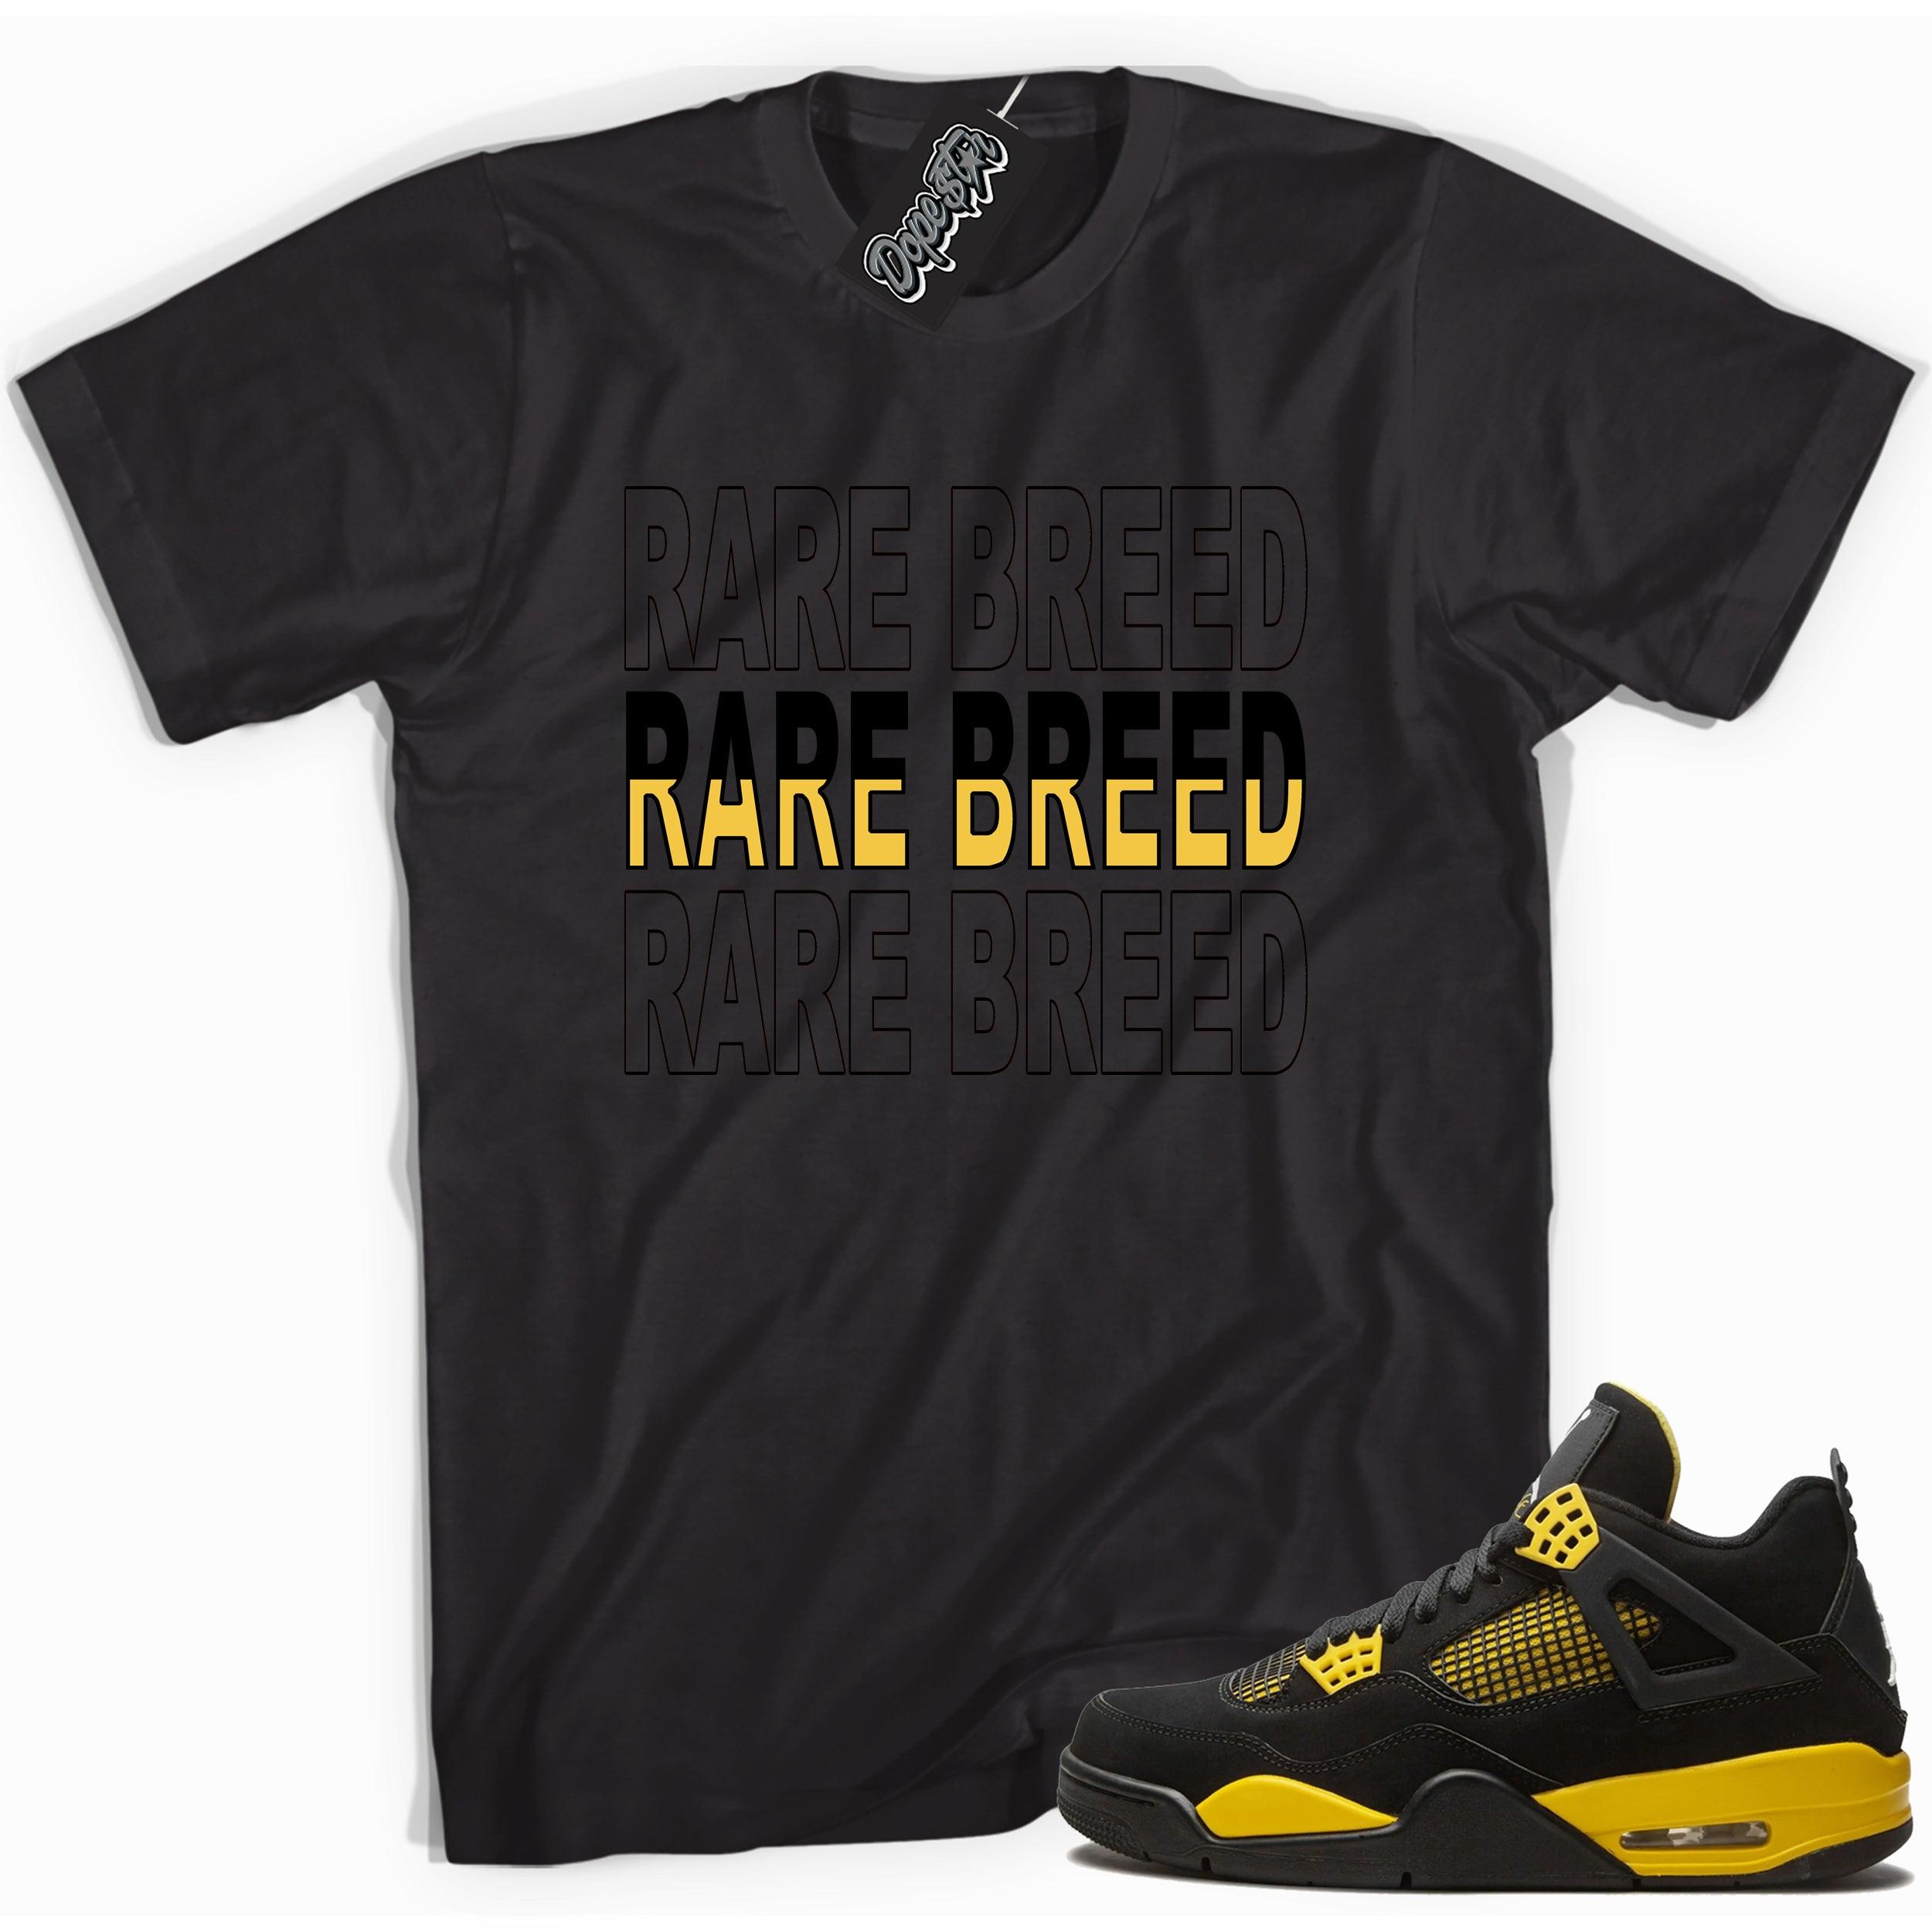 Cool black graphic tee with 'rare breed' print, that perfectly matches  Air Jordan 4 Thunder sneakers